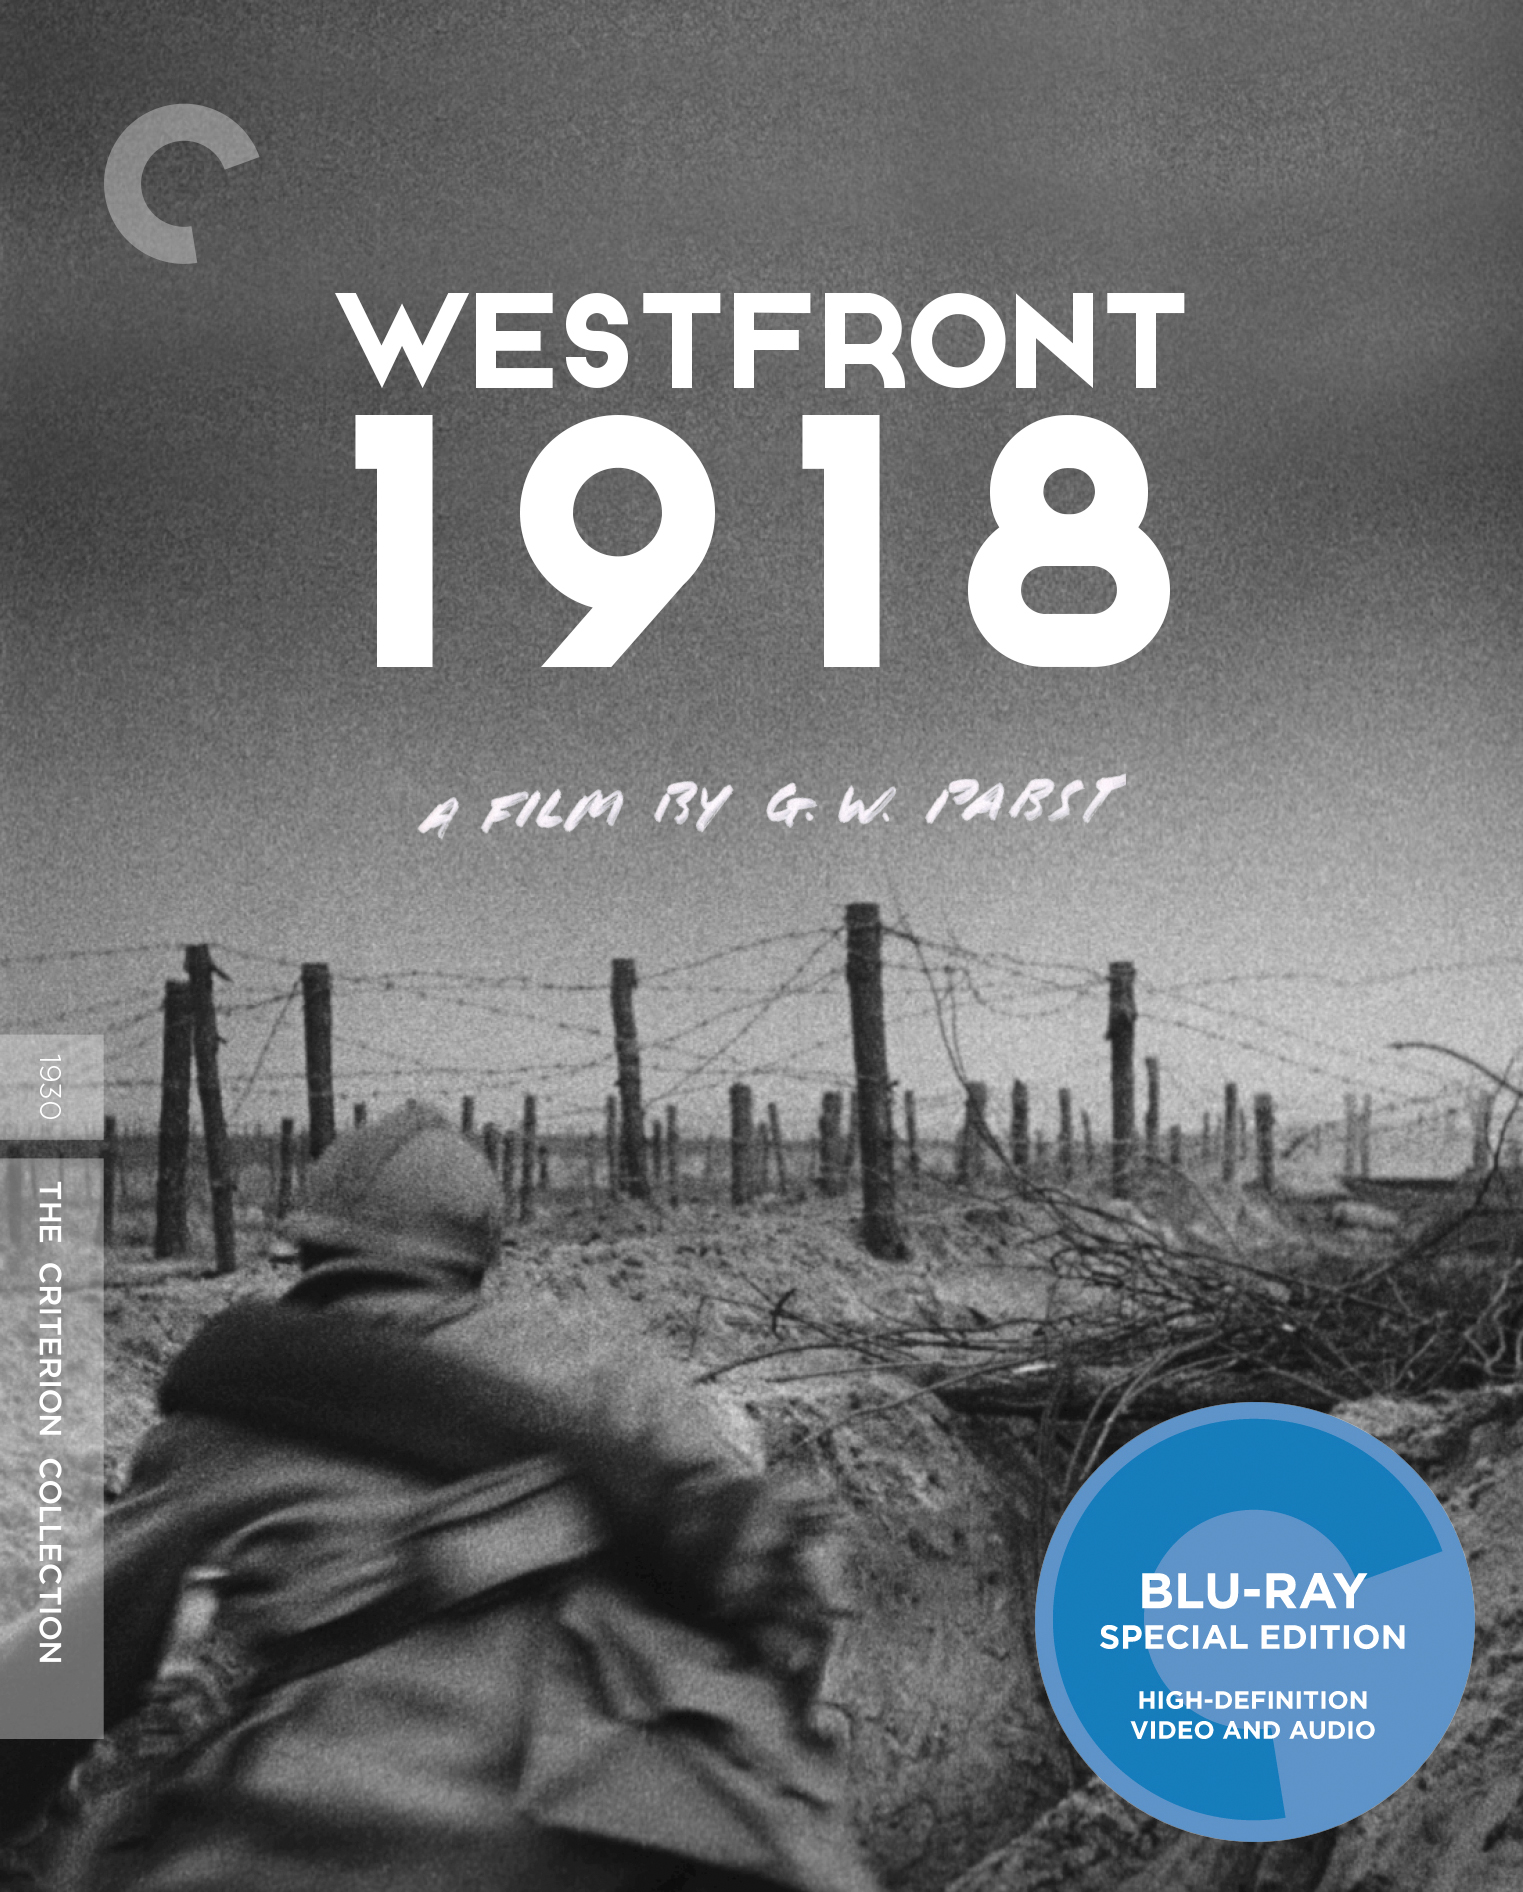 Westfront 1918 [Criterion Collection] [Blu-ray] [1930]